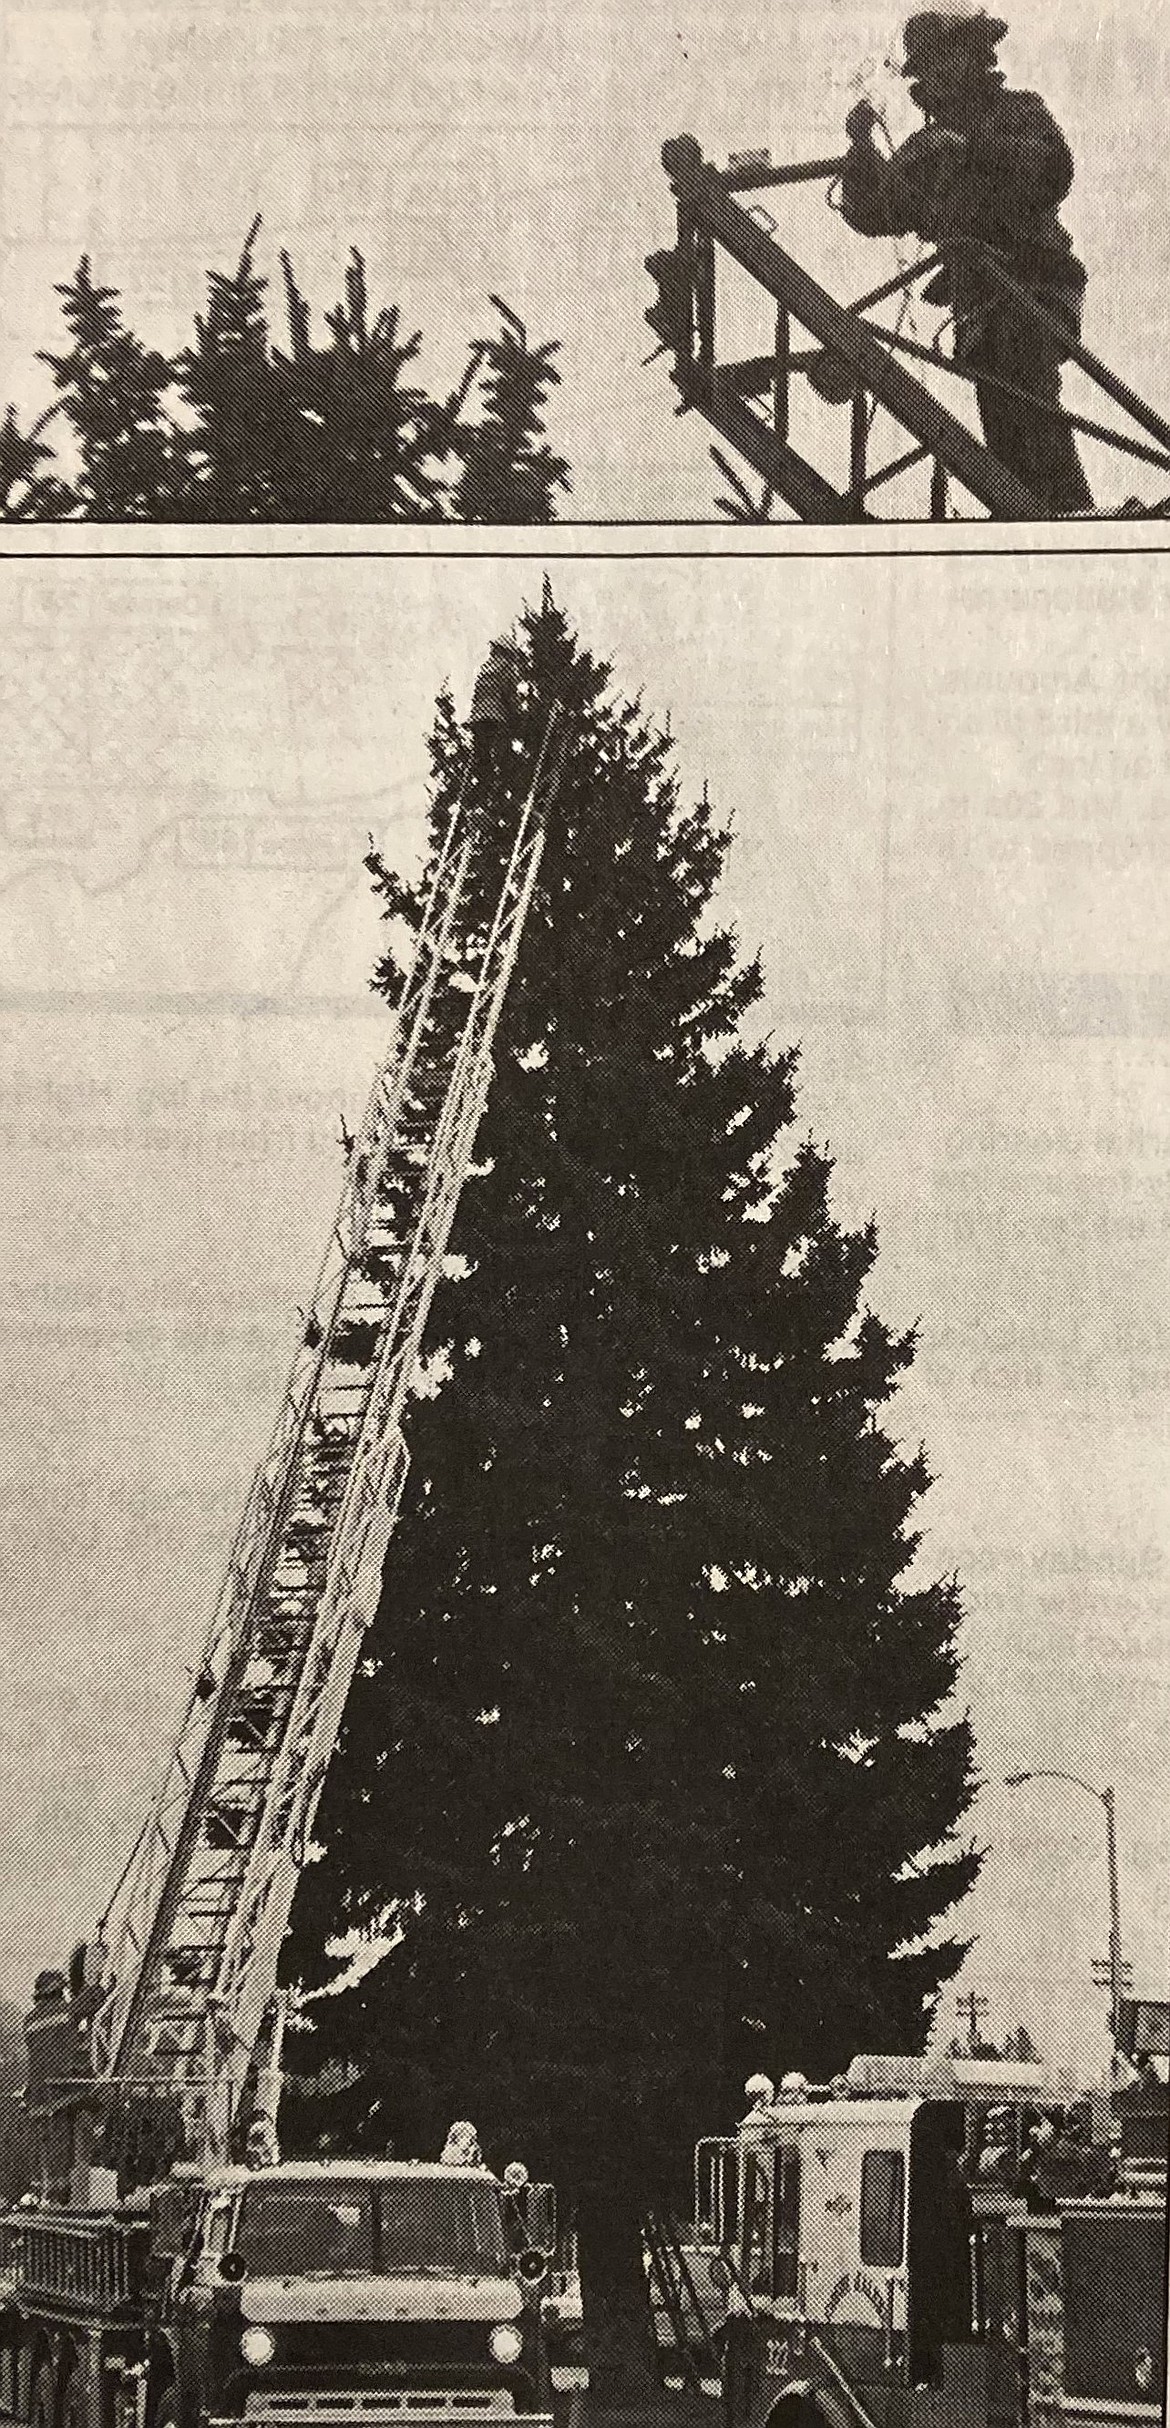 In December 1988, Ken Capaul hung lights on the Freedom Tree while other Coeur d’Alene firefighters helped from below.